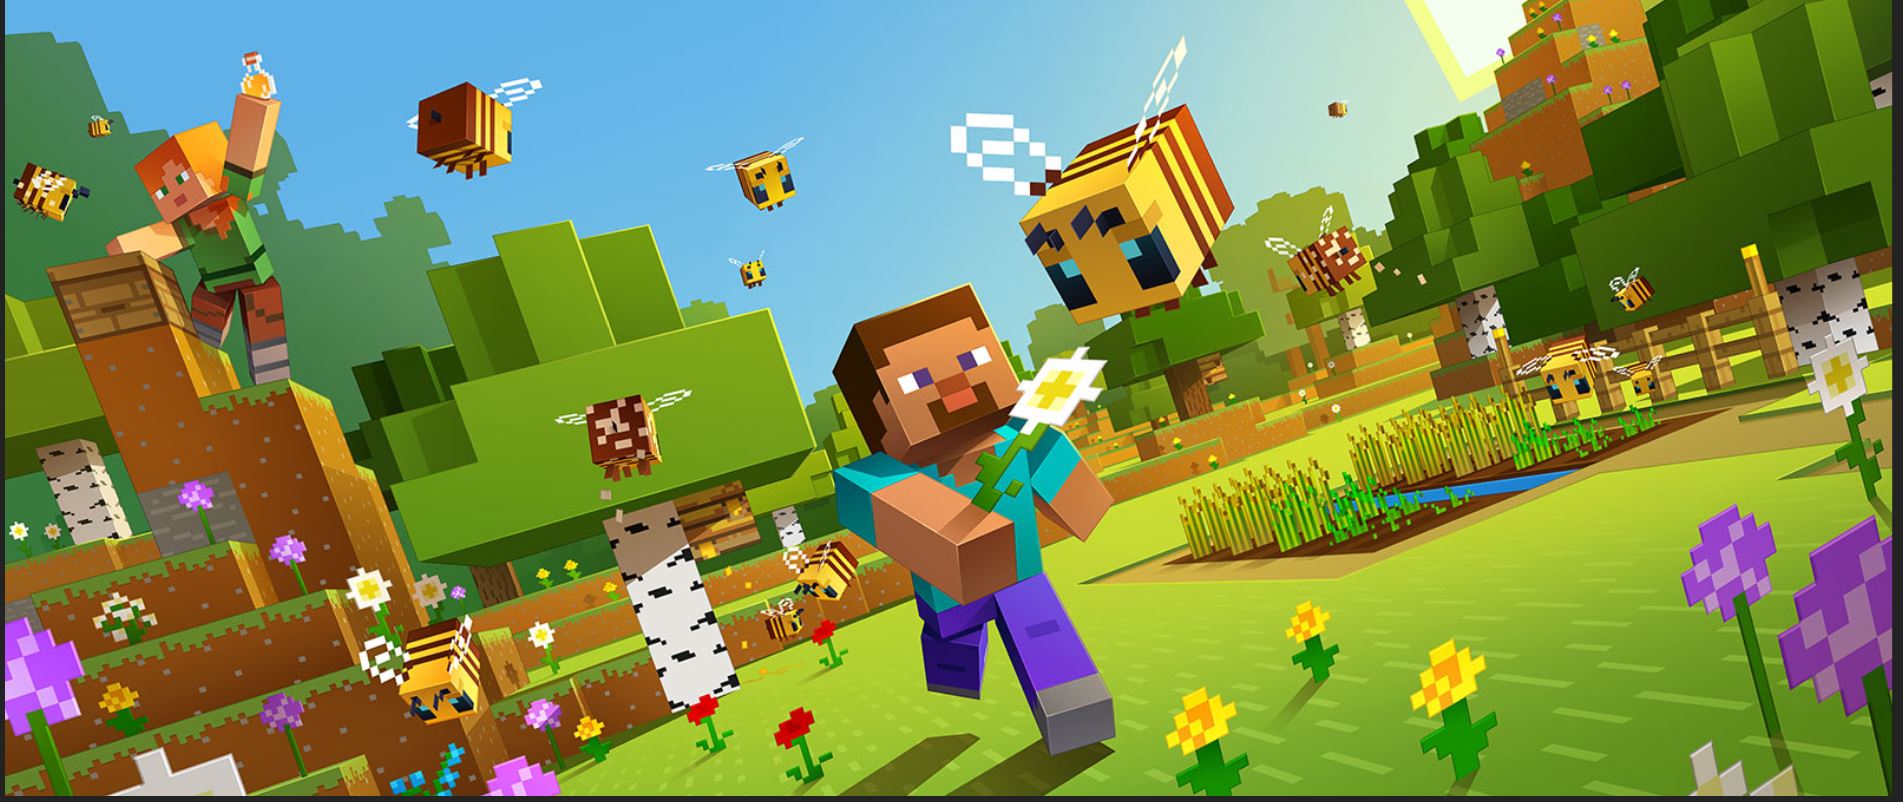 Minecraft Popularity Has Been Rising During The Current Pandemic, Minecraft Now Has Close-to 132 Million Active Users